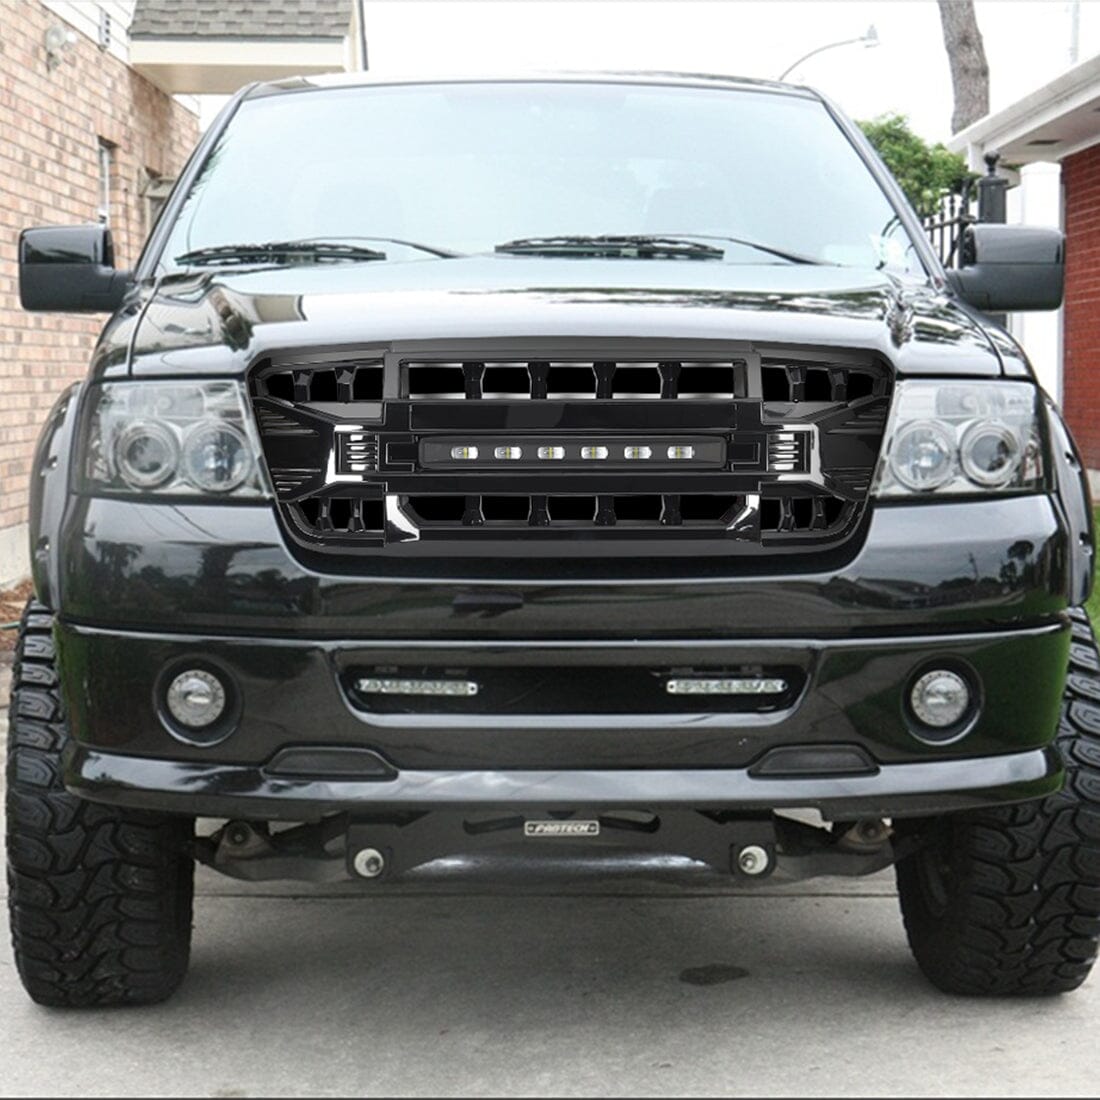 Armor Grille W/Off-Road Lights-Glossy Black For 2004-2008 Ford F150|Amoffroad